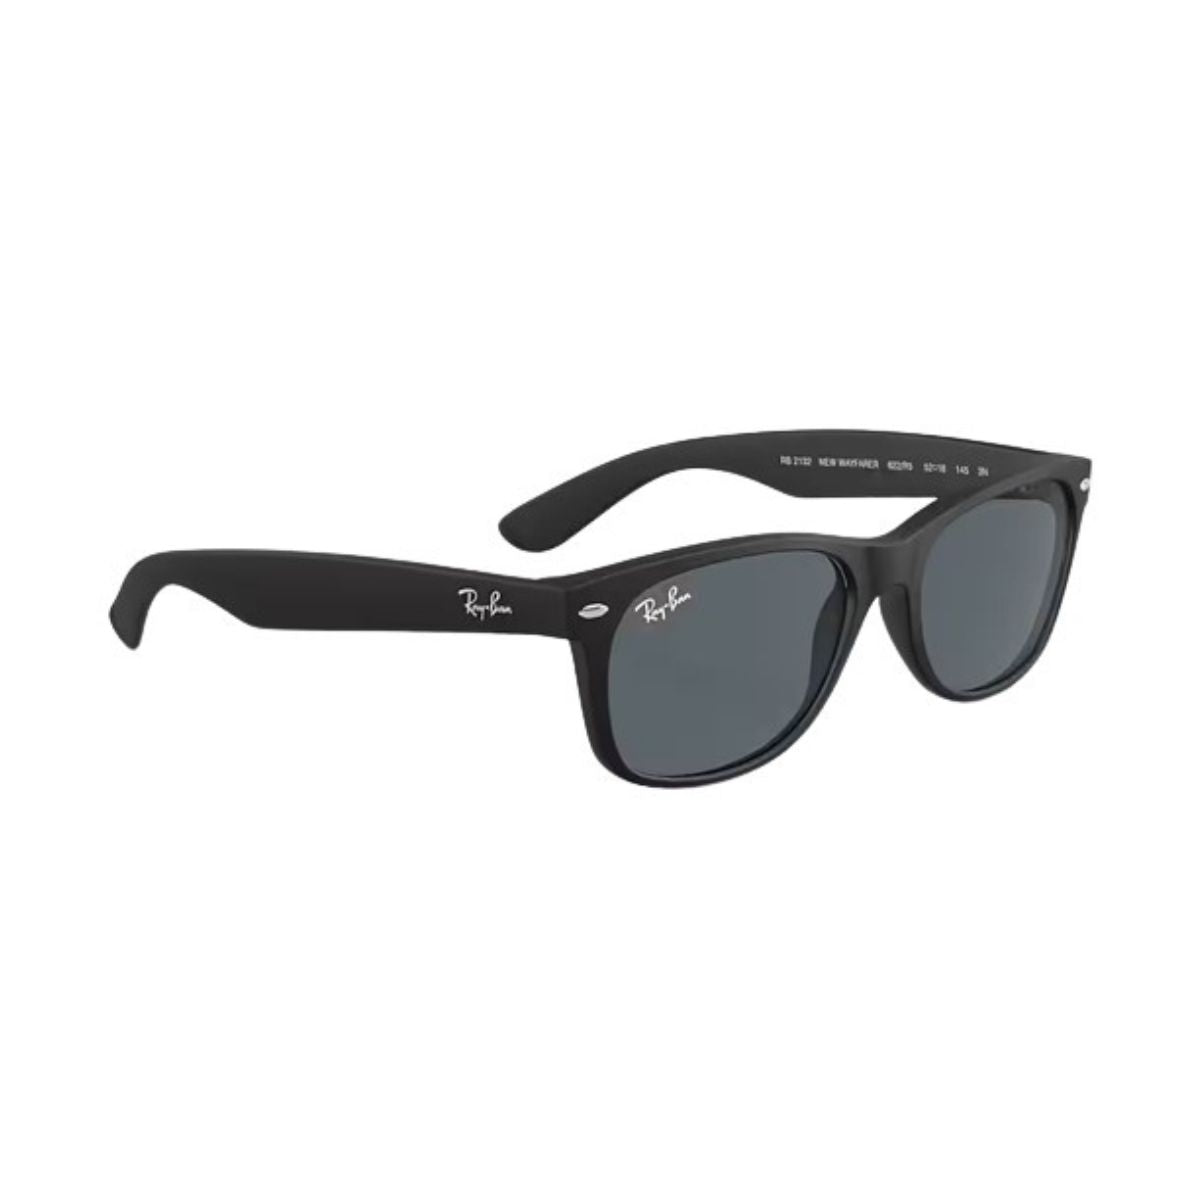 "Shop Ray Ban  2132 622/R5 Stylish Sunglass For men And Women At Optorium"